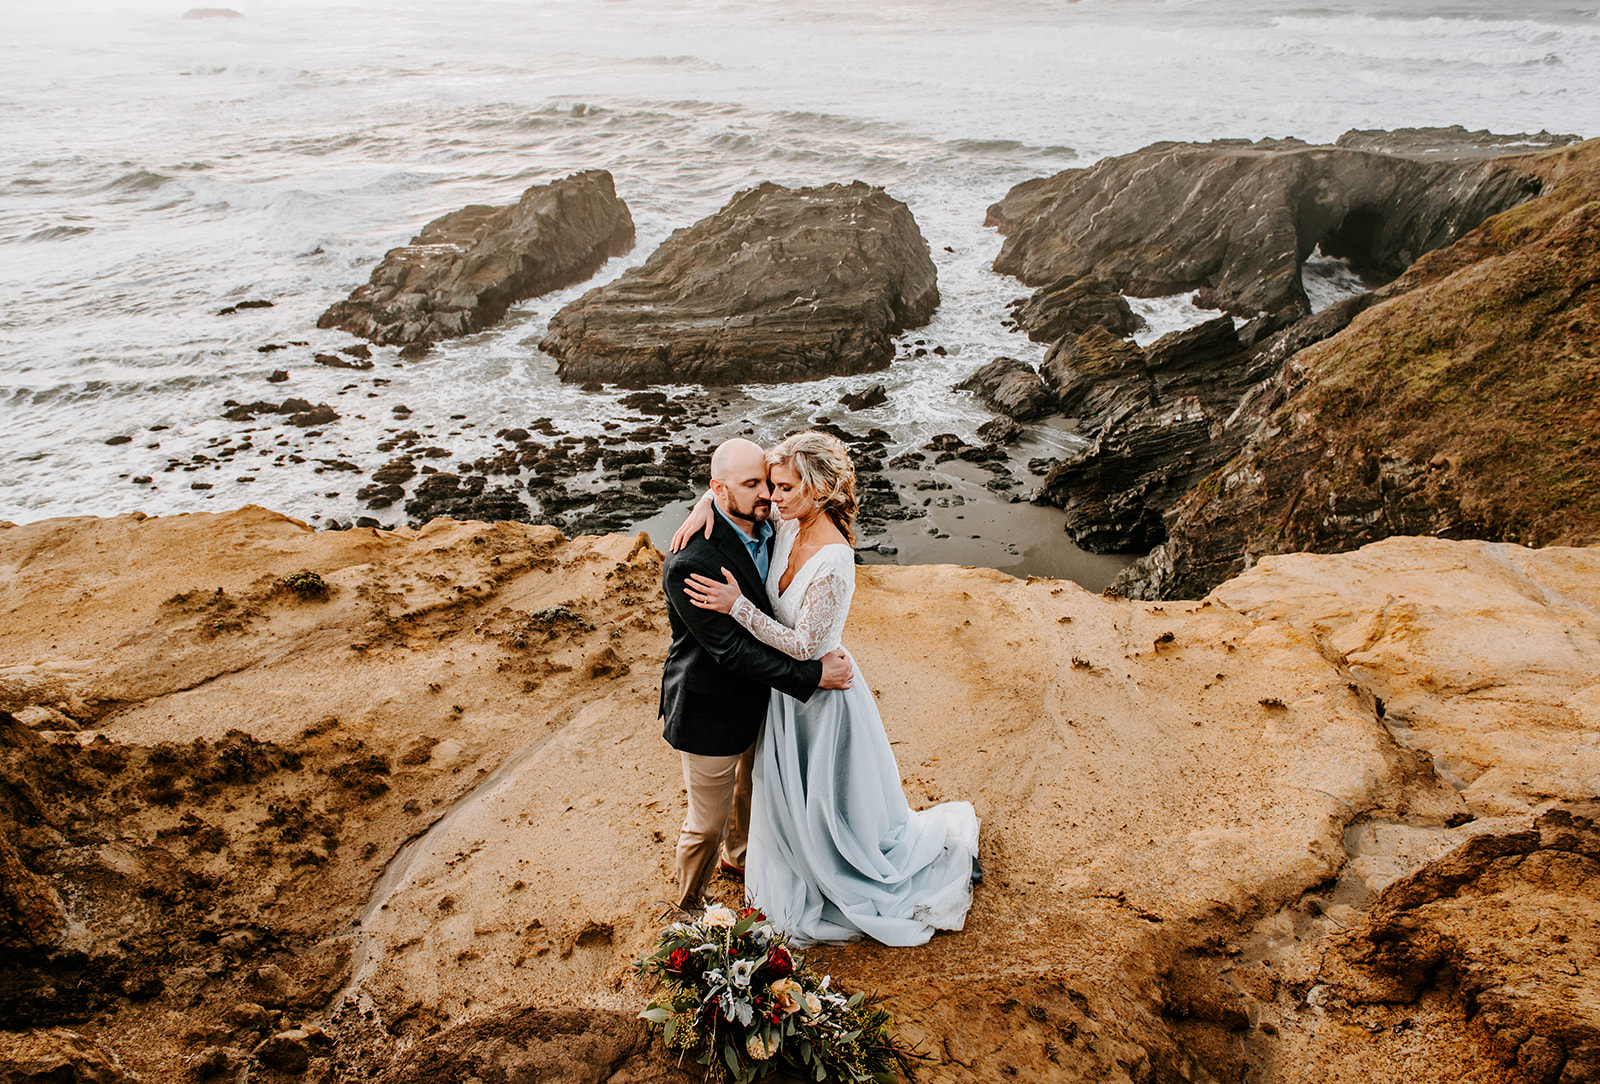 The bride and groom are embracing on the cliffs at Otter Point on the Oregon coast. The bride is wearing a blue dress.